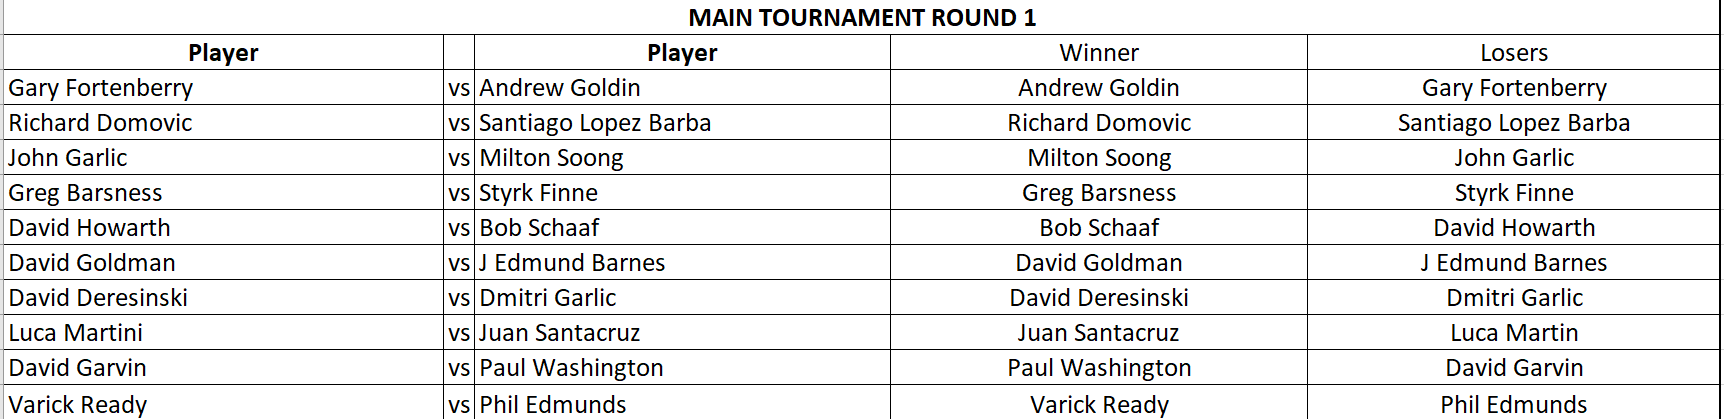 Round 1 Results.png